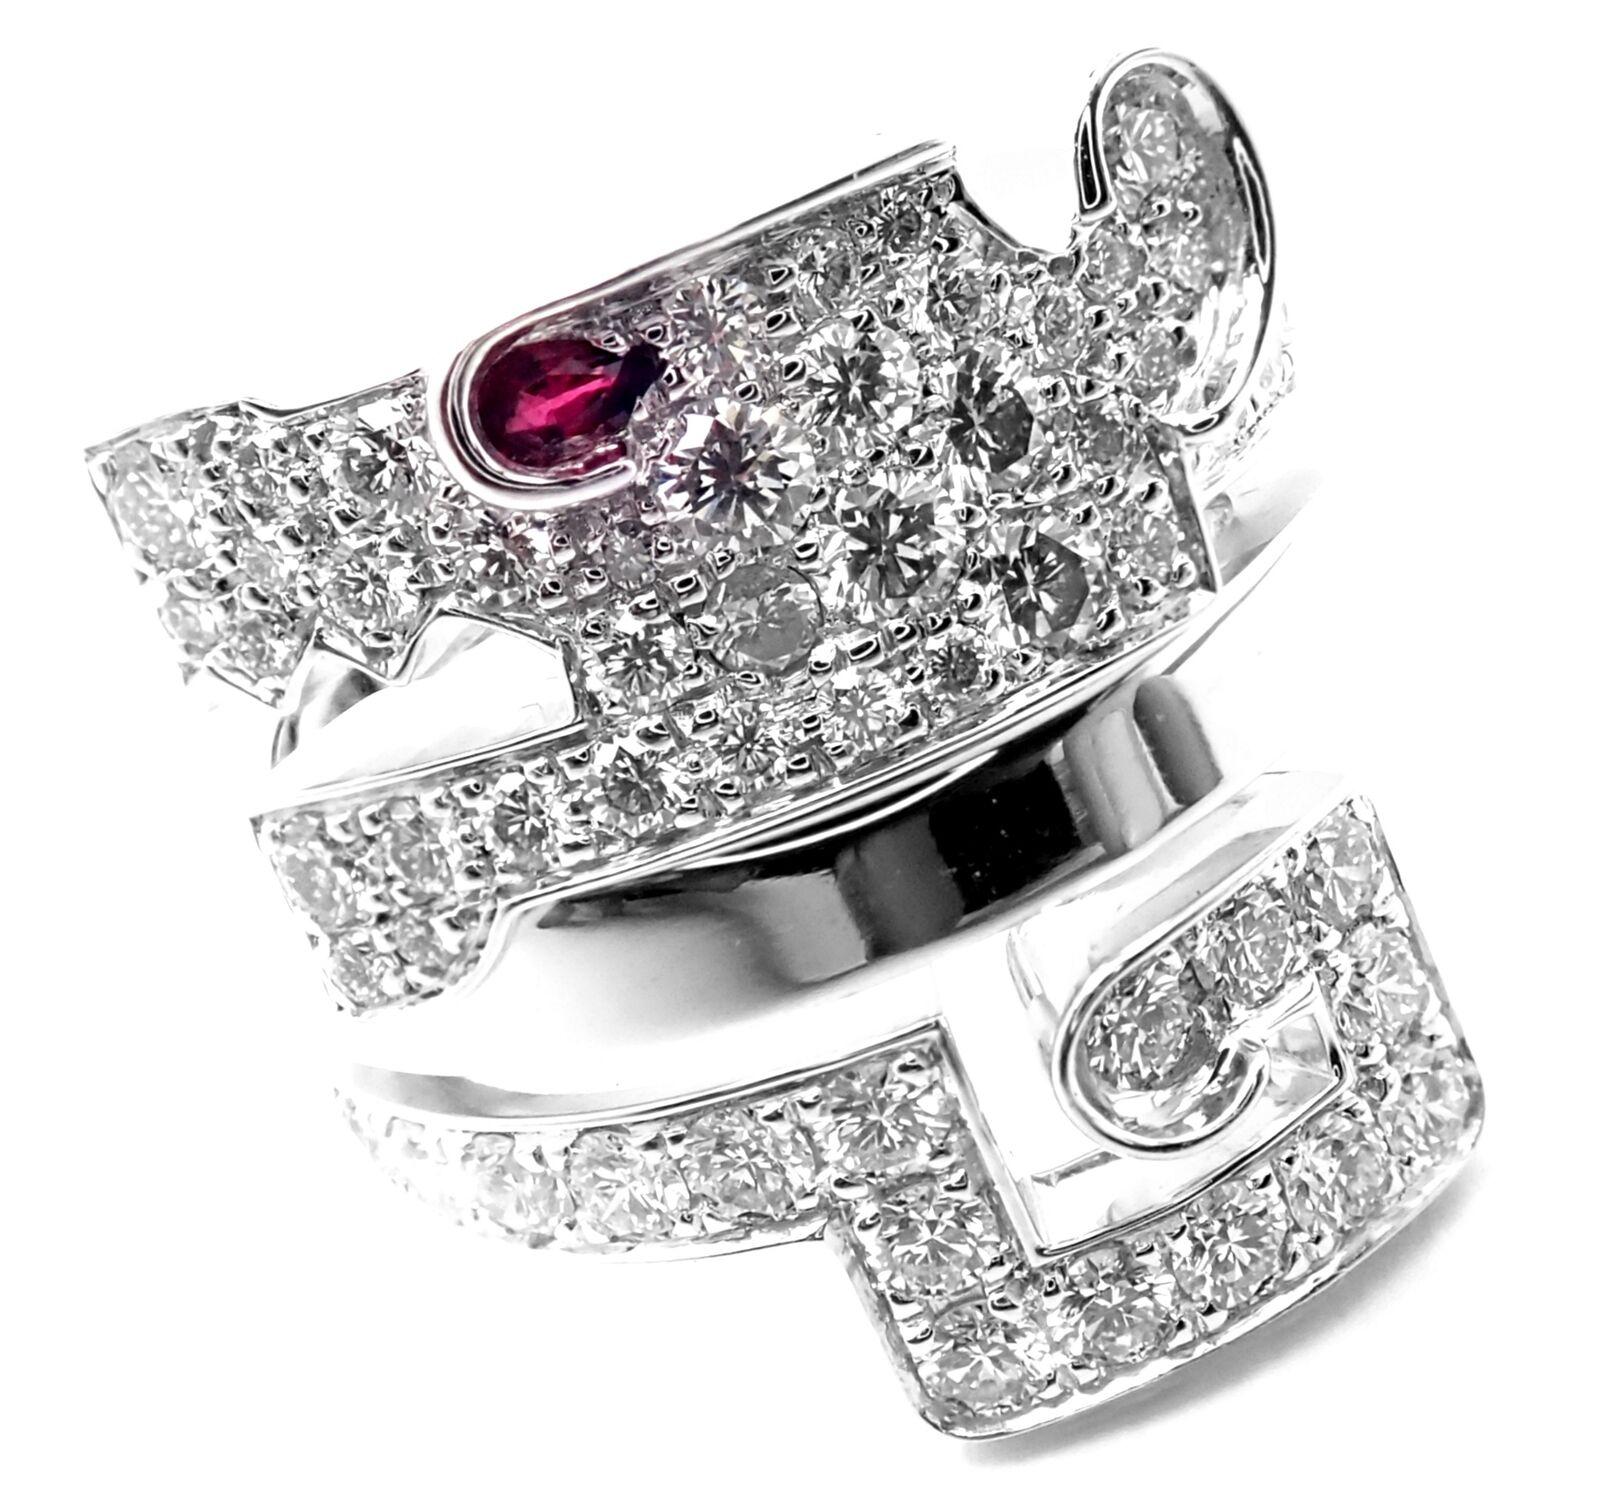 18k White Gold Le Baiser Du Dragon Diamond Ruby Ring by Cartier. 
With 56 round brilliant cut diamonds VVS1 clarity, E color total weight 
approx. 1.68ct
This ring comes with Cartier box and a service paper from a Cartier store.
Details: 
Ring Size: